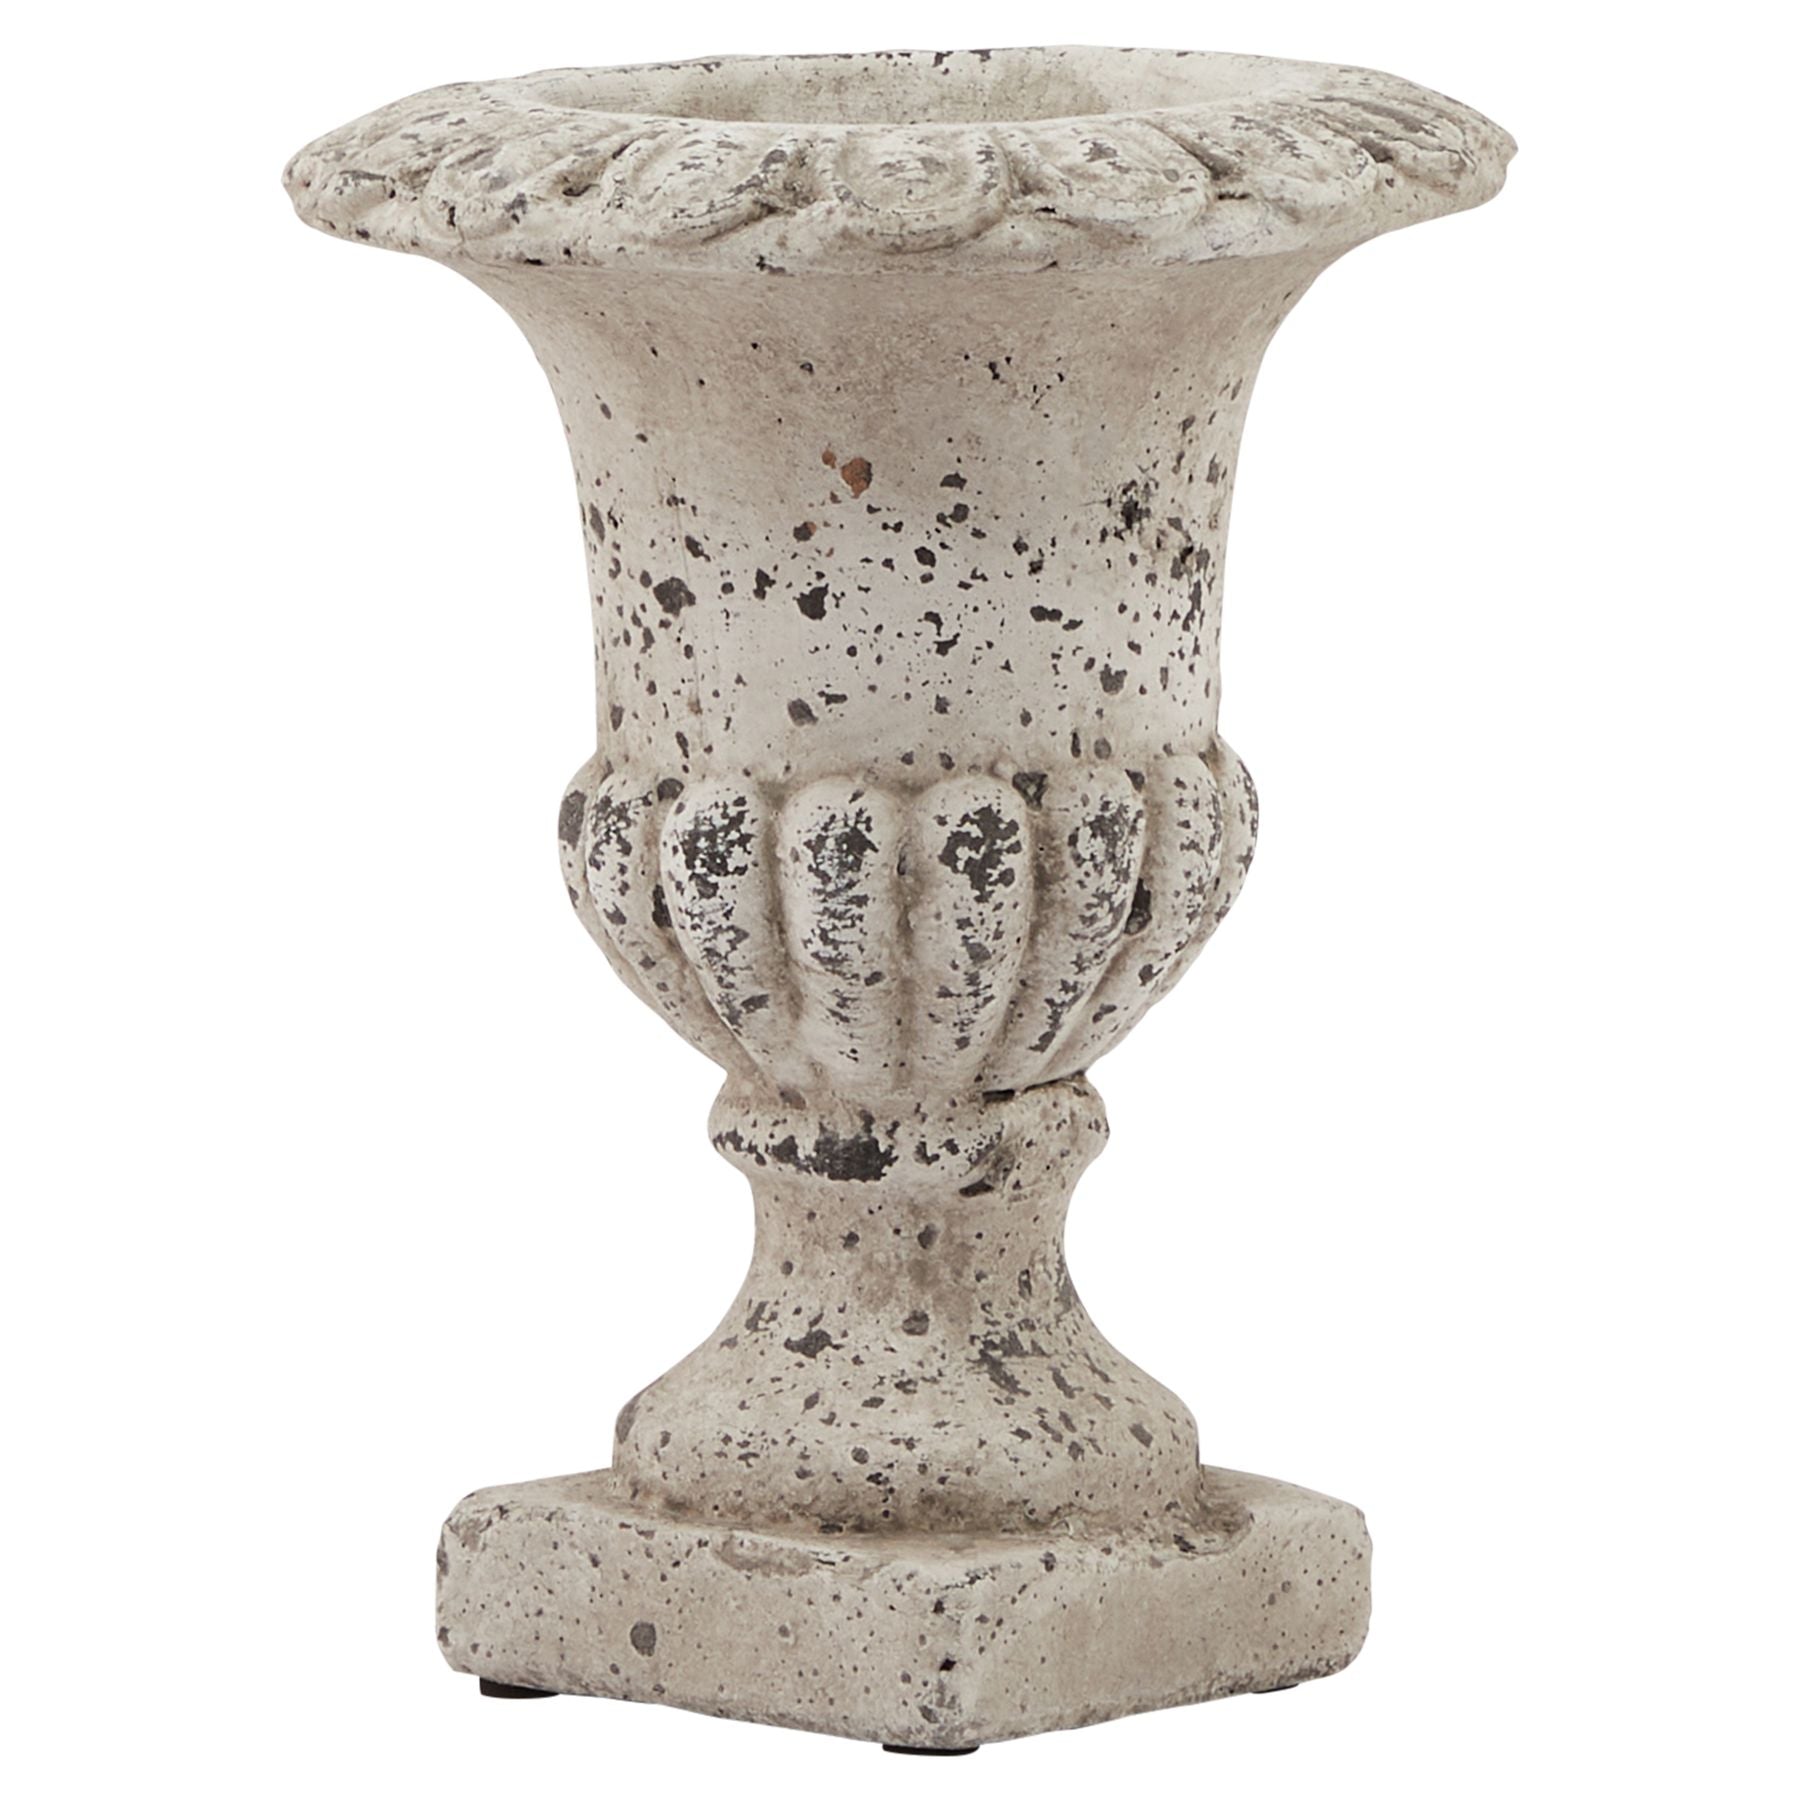 View Large Fluted Stone Ceramic Urn information